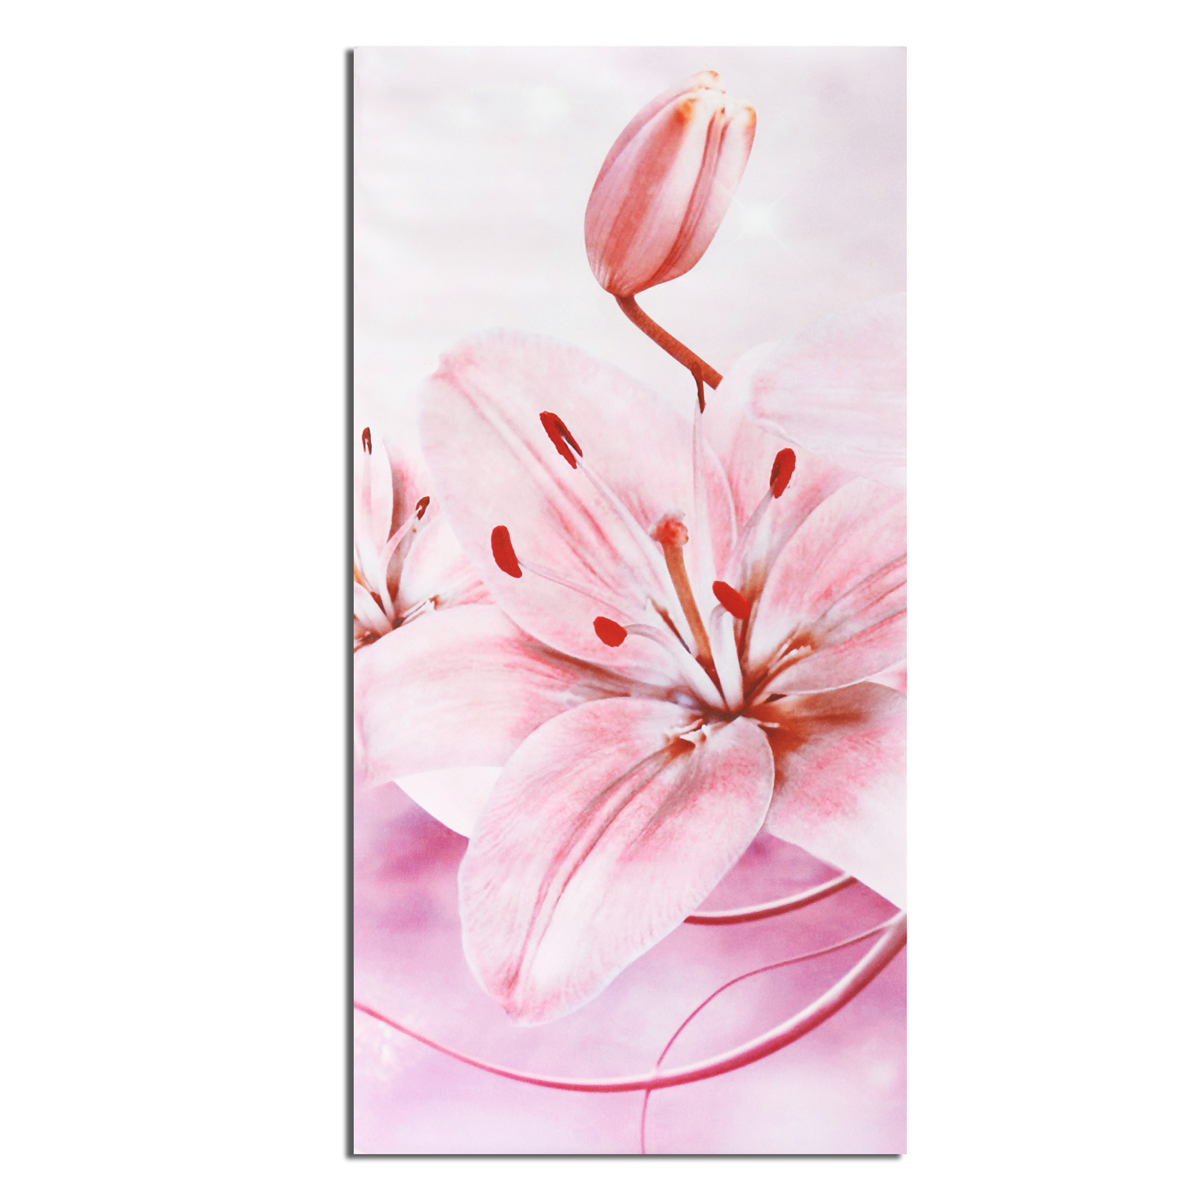 5PCS-Frameless-Canvas-Paintings-Lilies-Art-Paint-for-Home-Wall-Decoration-1080757-6